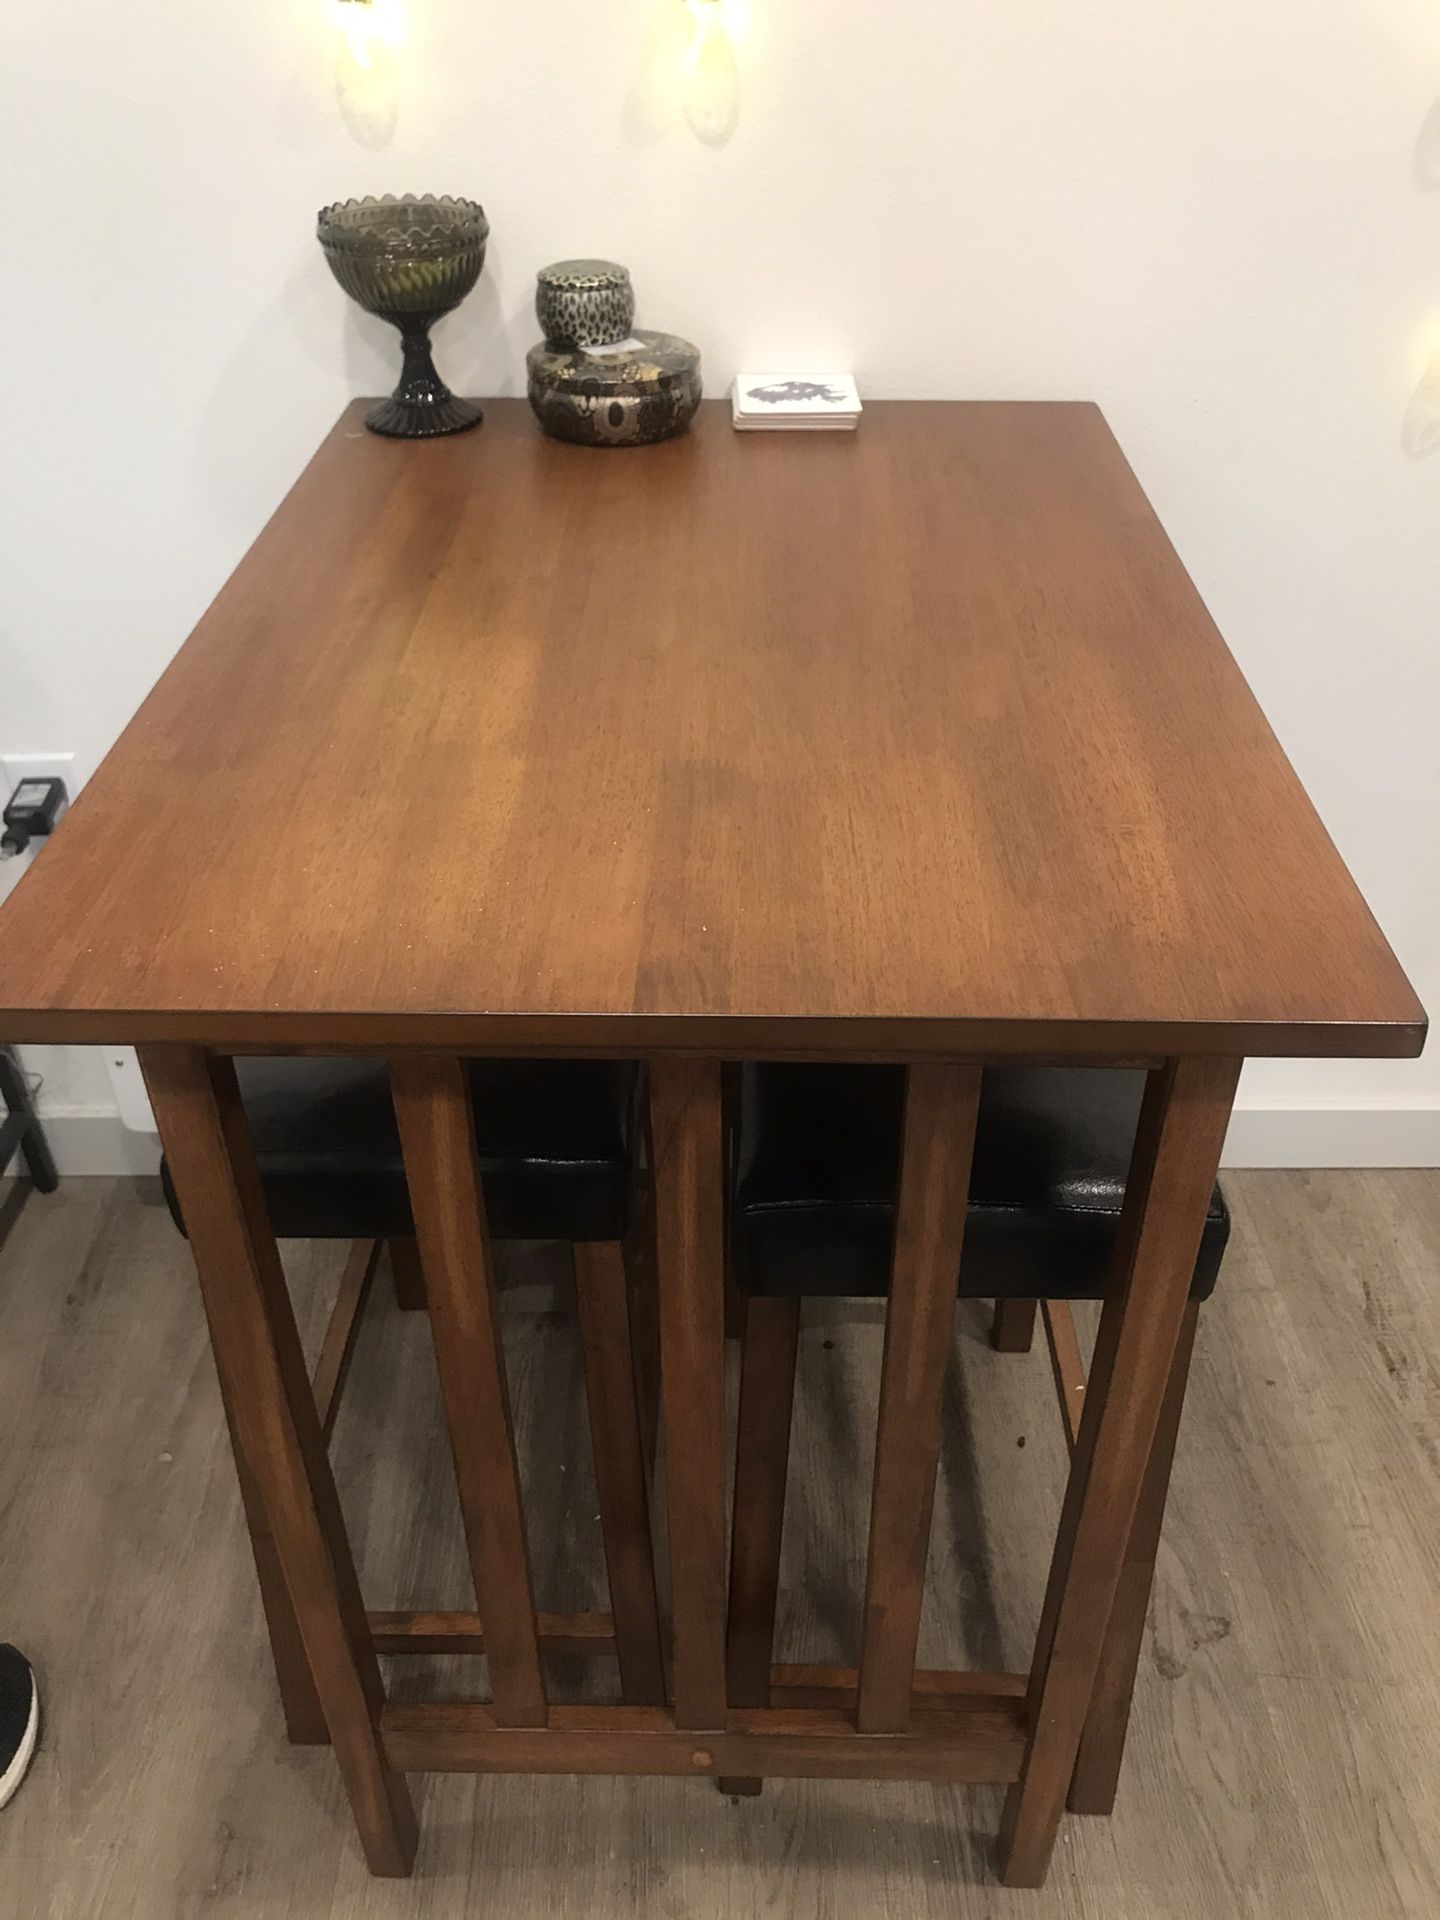 Kitchen table with two chairs